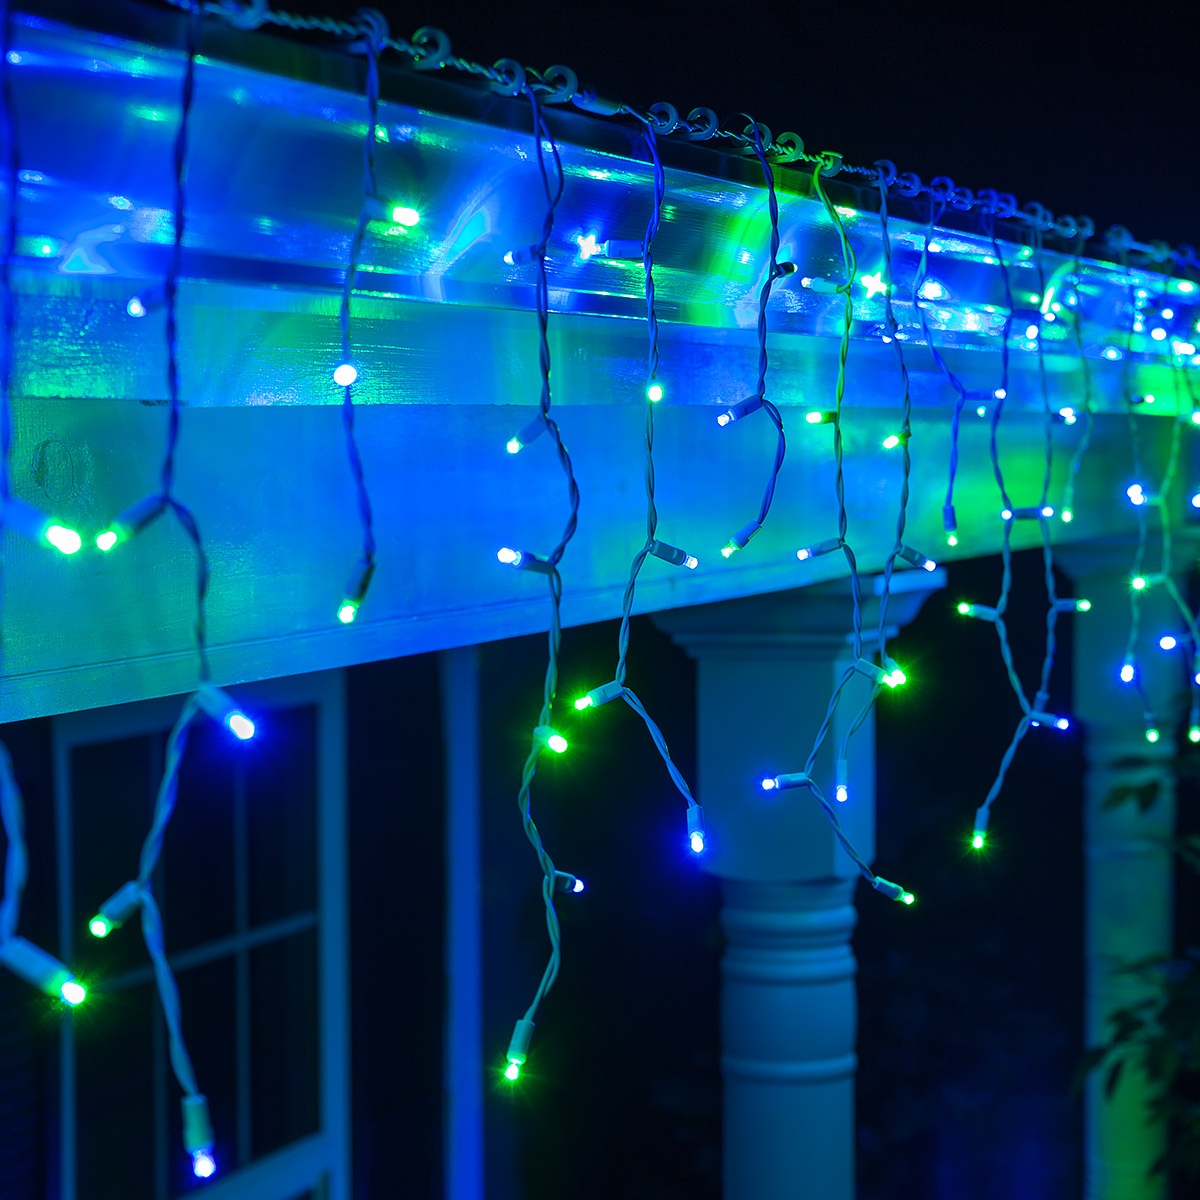 70 5mm LED Icicle Lights, Blue/Green, White Wire - Yard Envy